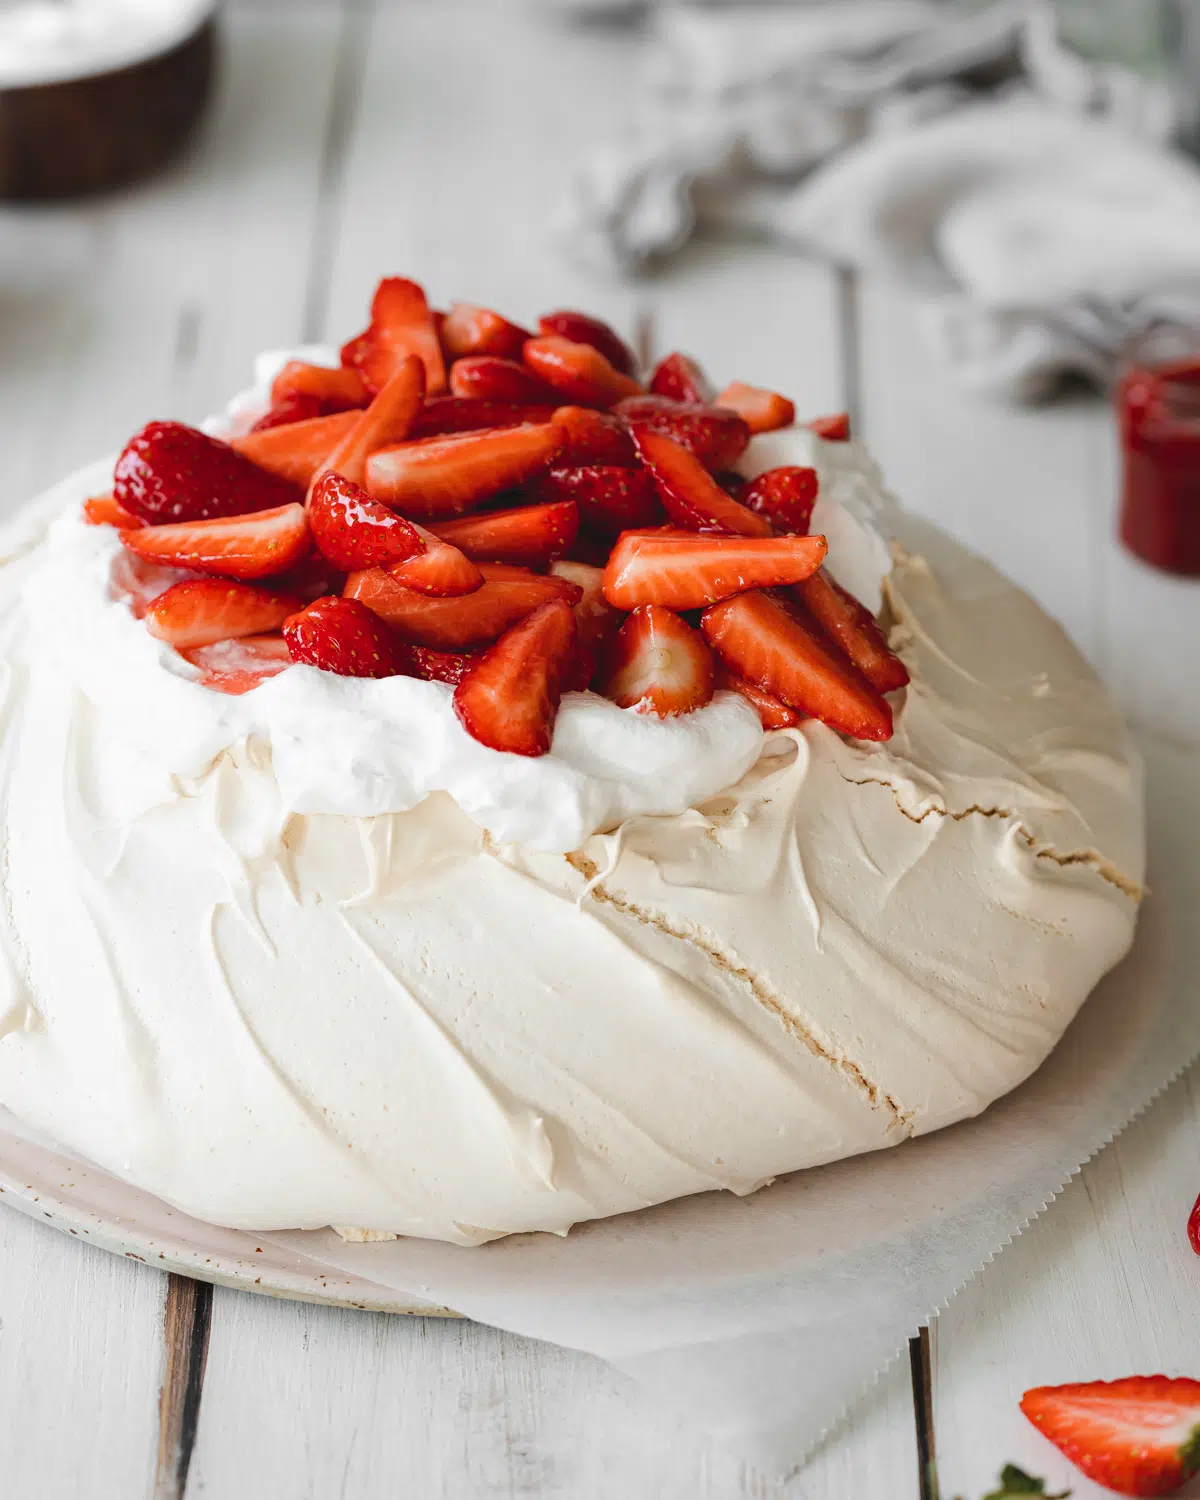 vegan pavlova with fresh strawberries and cream on a white wooden surface.